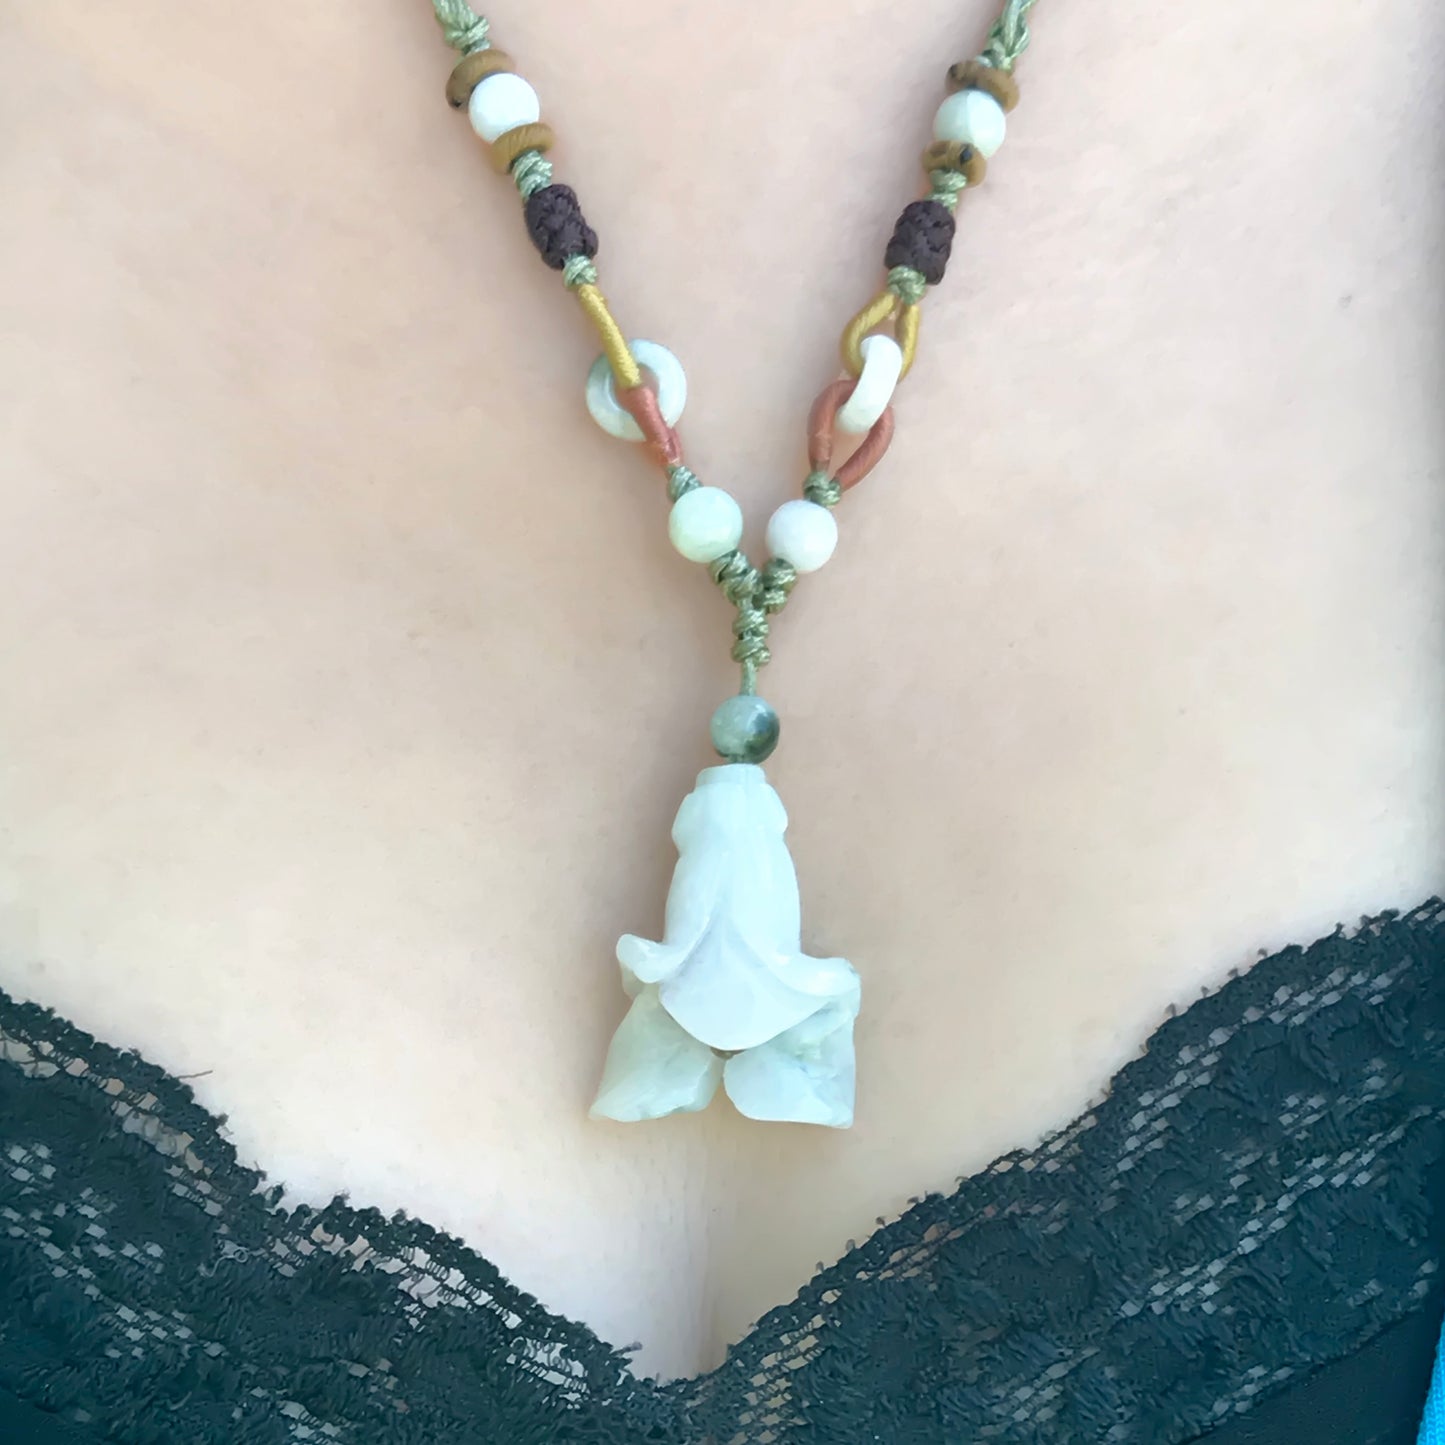 Get a One-of-a-Kind Jewelry Piece with Bellflower Jade Necklace made with Sea Green Cord